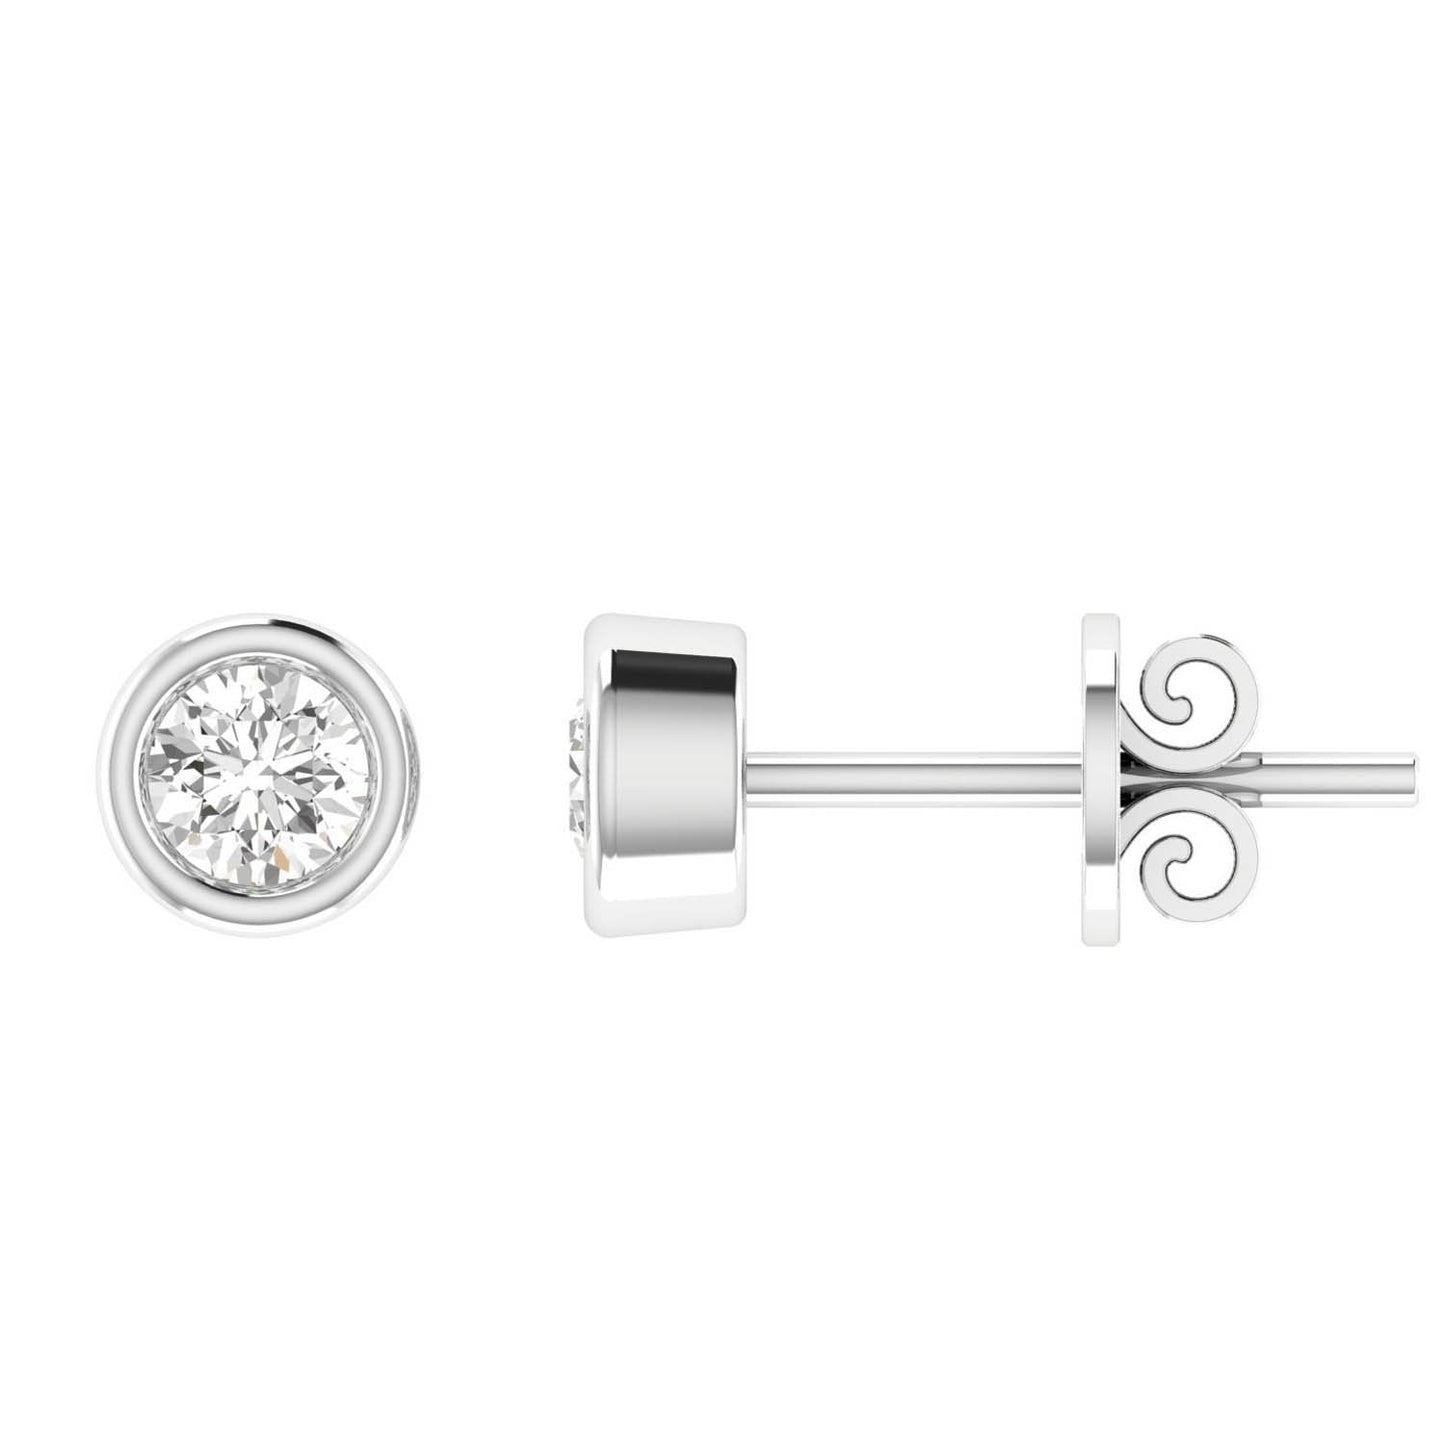 Diamond Stud Earrings with 0.30ct Diamonds in 18K White Gold - 18WBE30